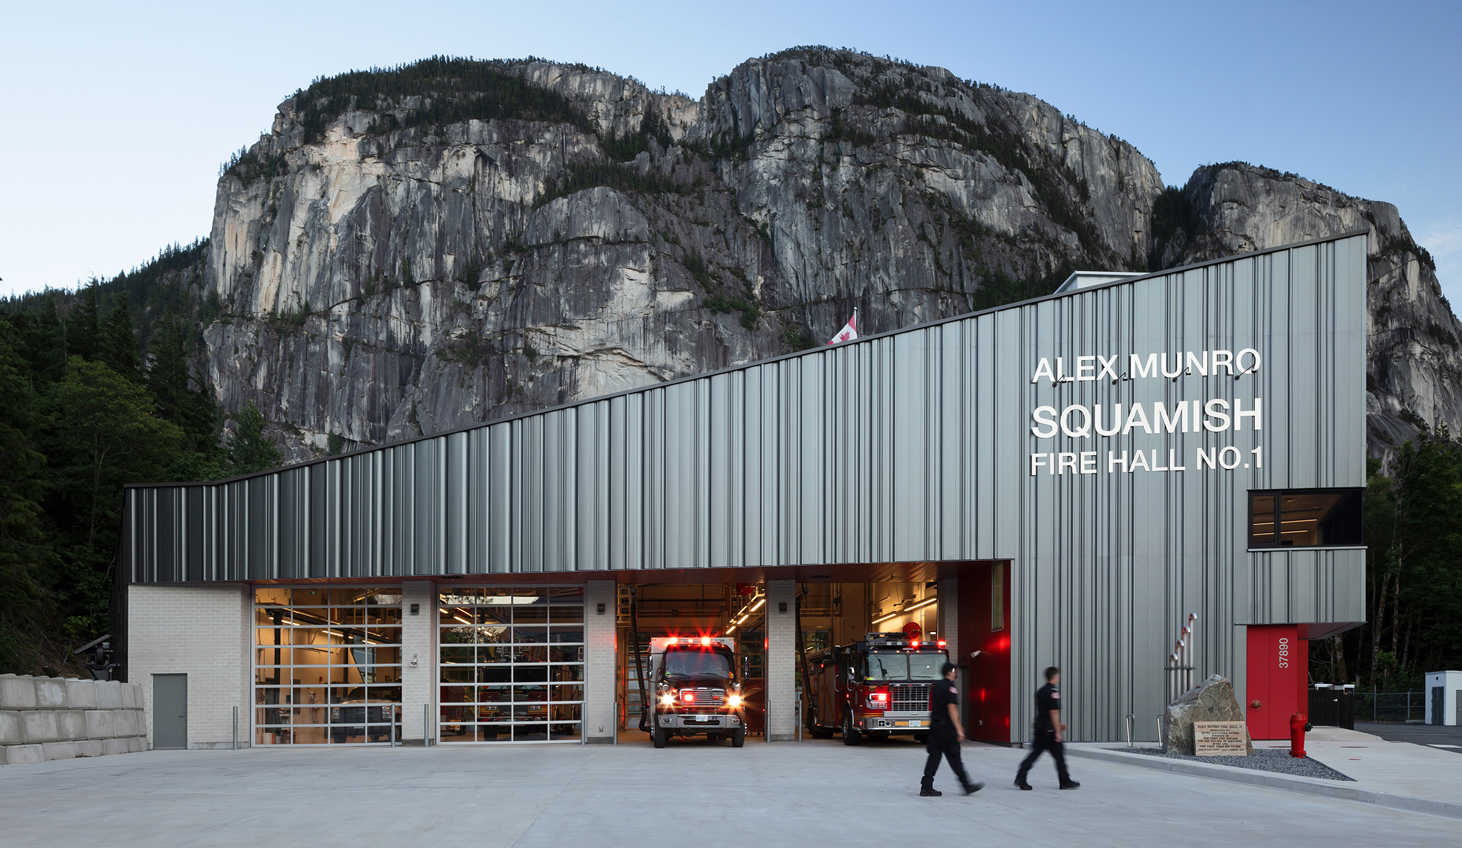 Exterior front view of Squamish Fire Hall No. 1 at dusk. The metal cladded building is framed the Stawamus Chief behind it.